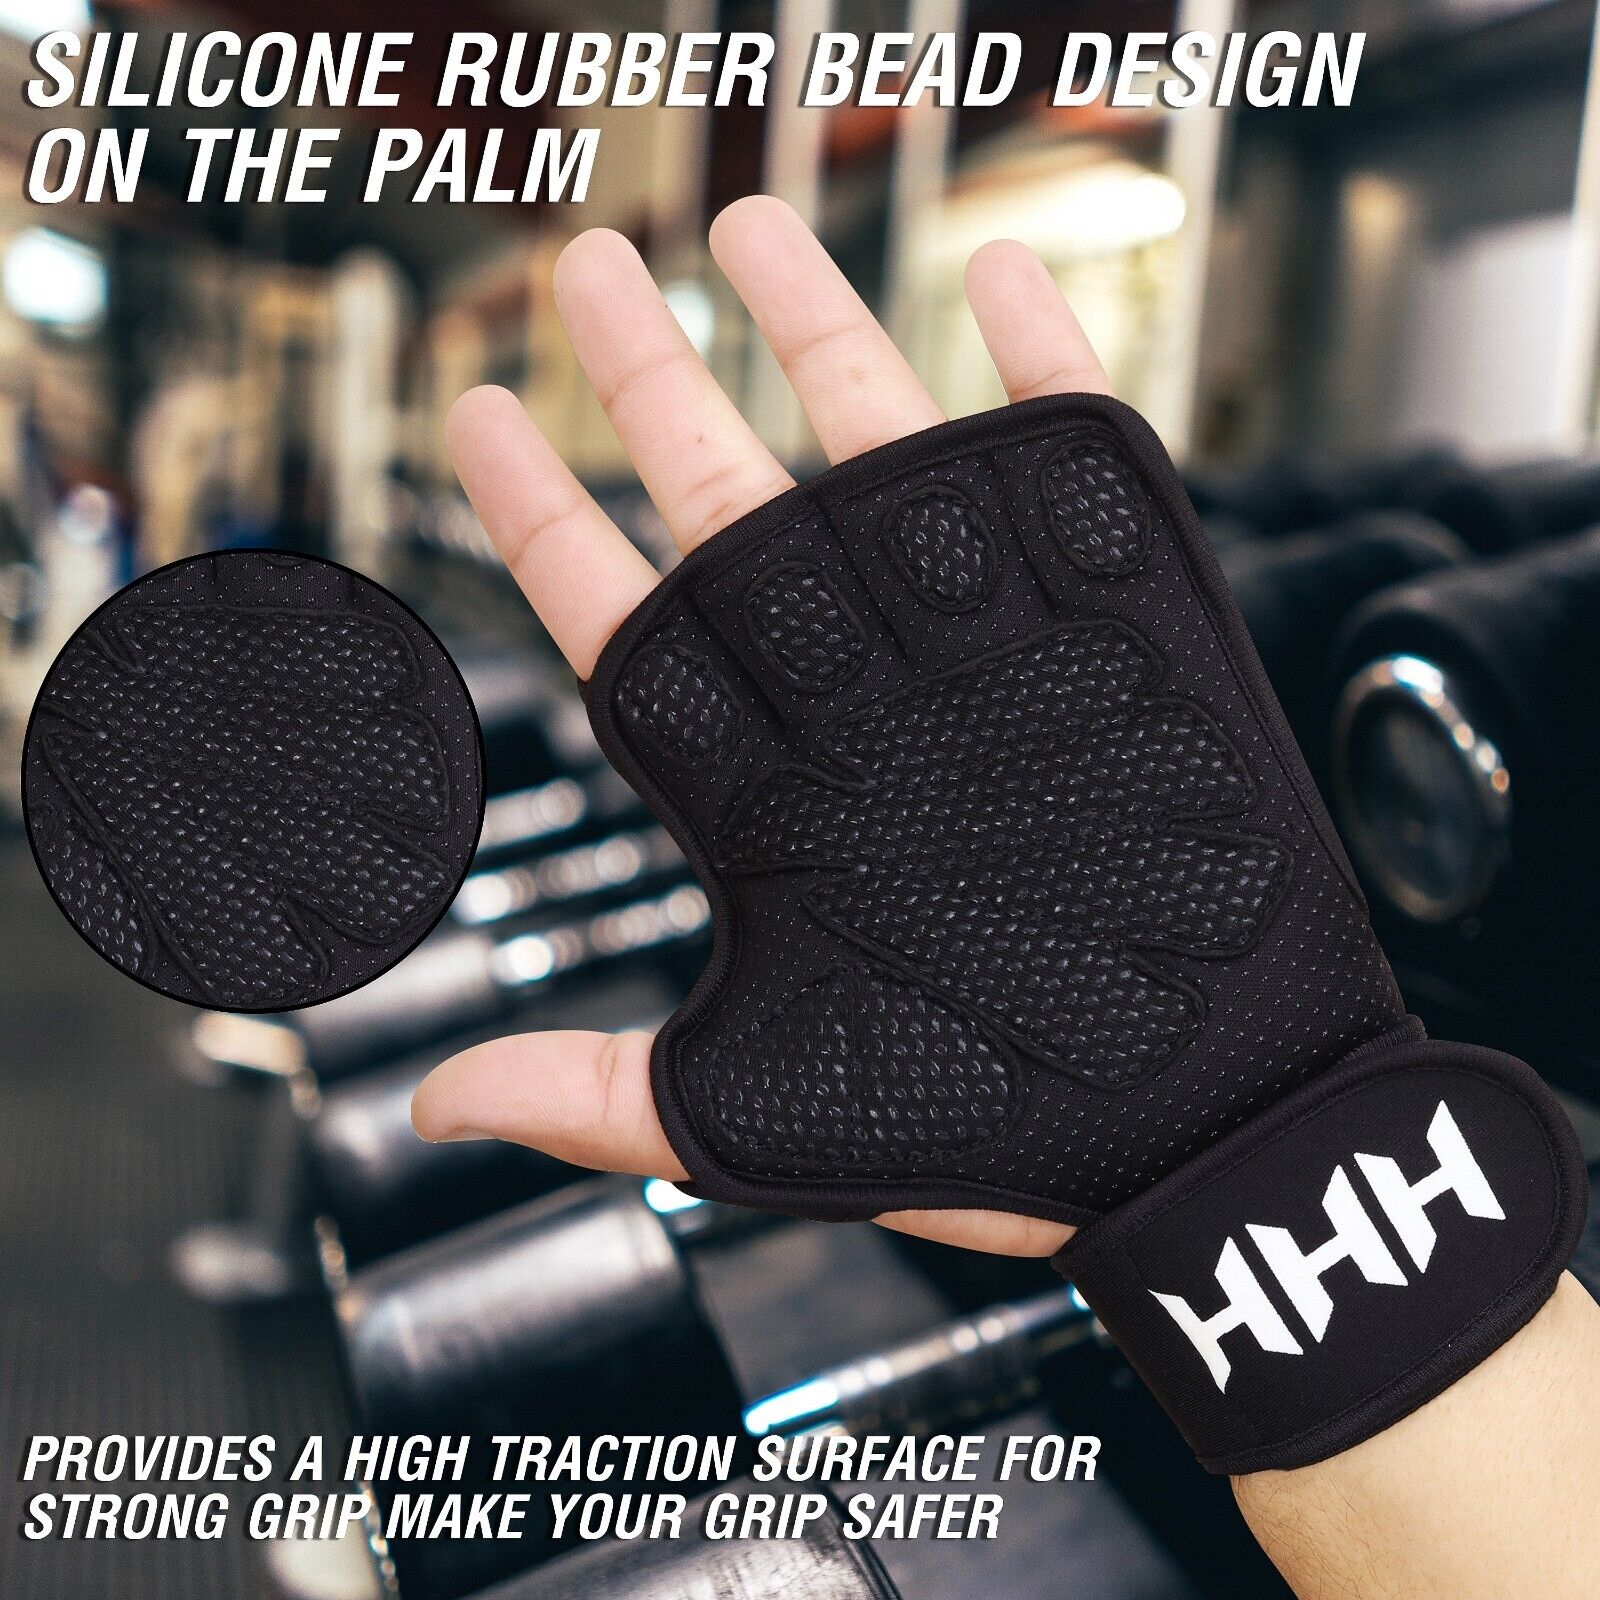 Gym Gloves Wrist Support - Weight Lifting Gym Gel padded Gloves strap